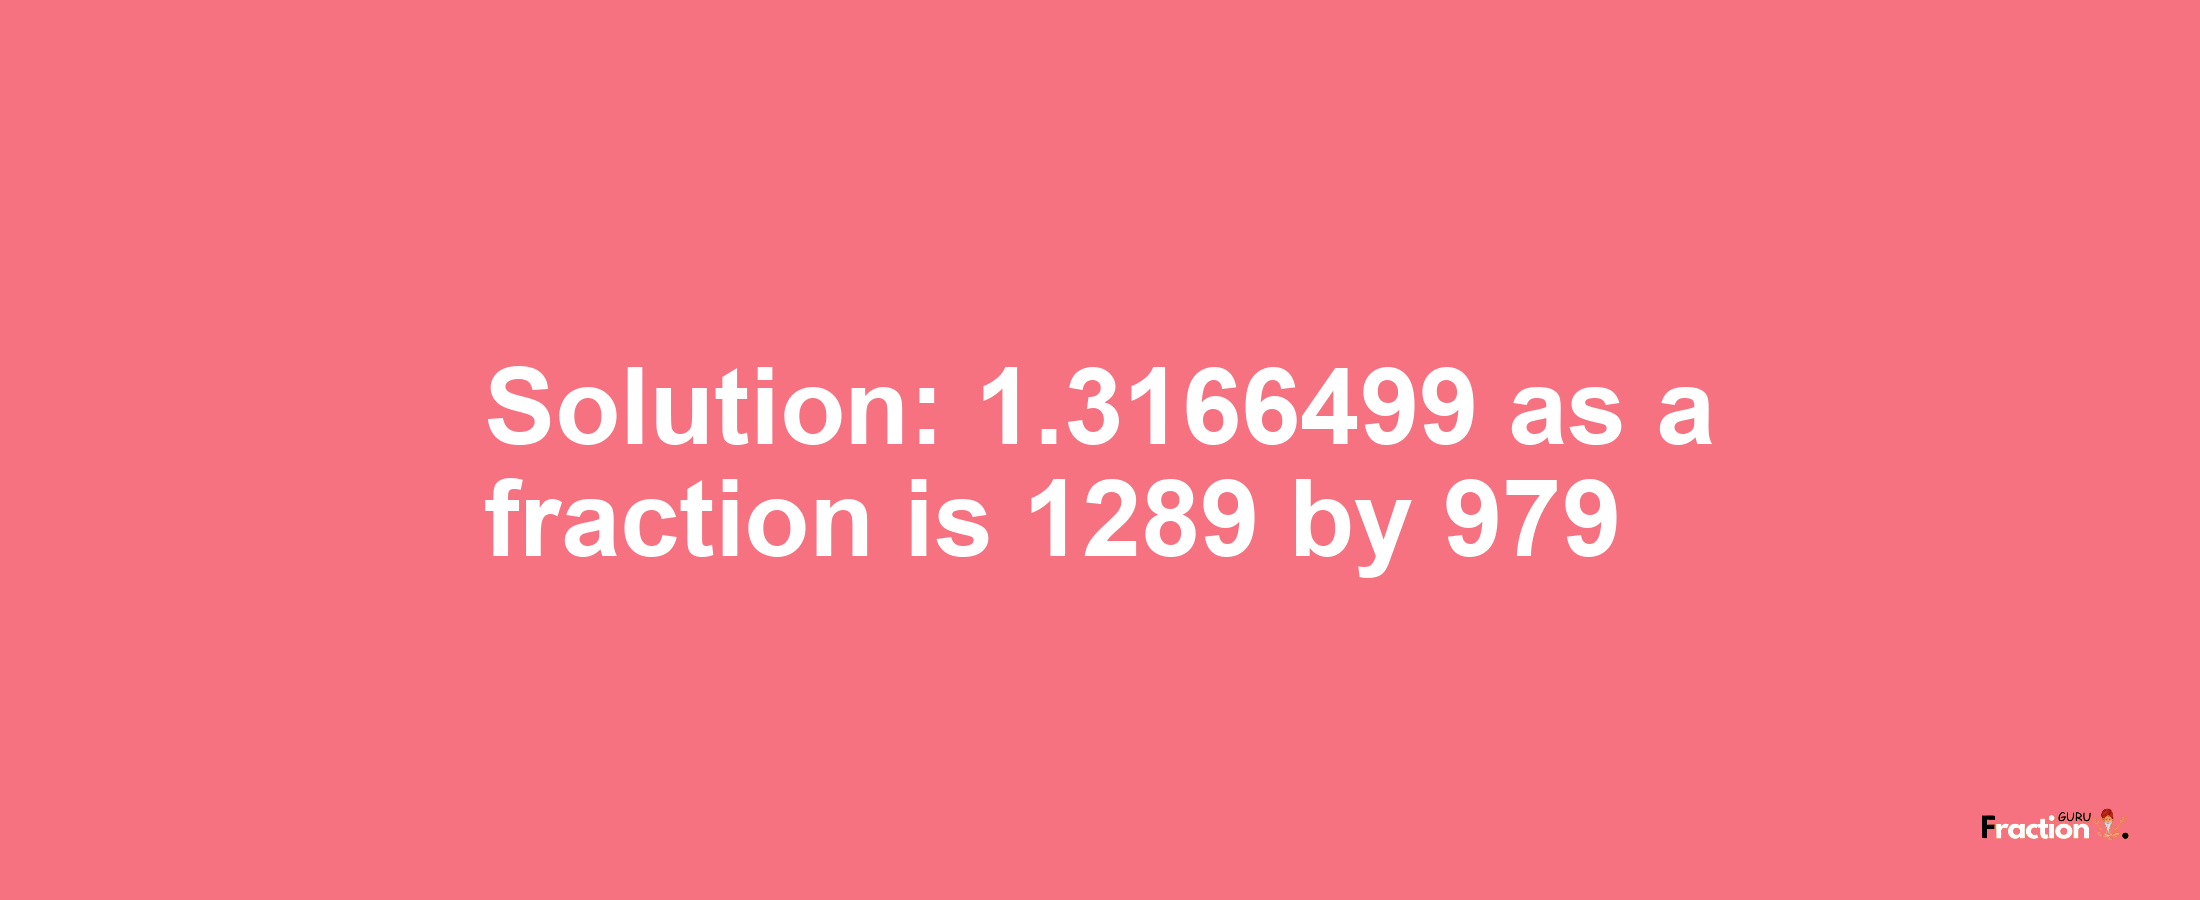 Solution:1.3166499 as a fraction is 1289/979